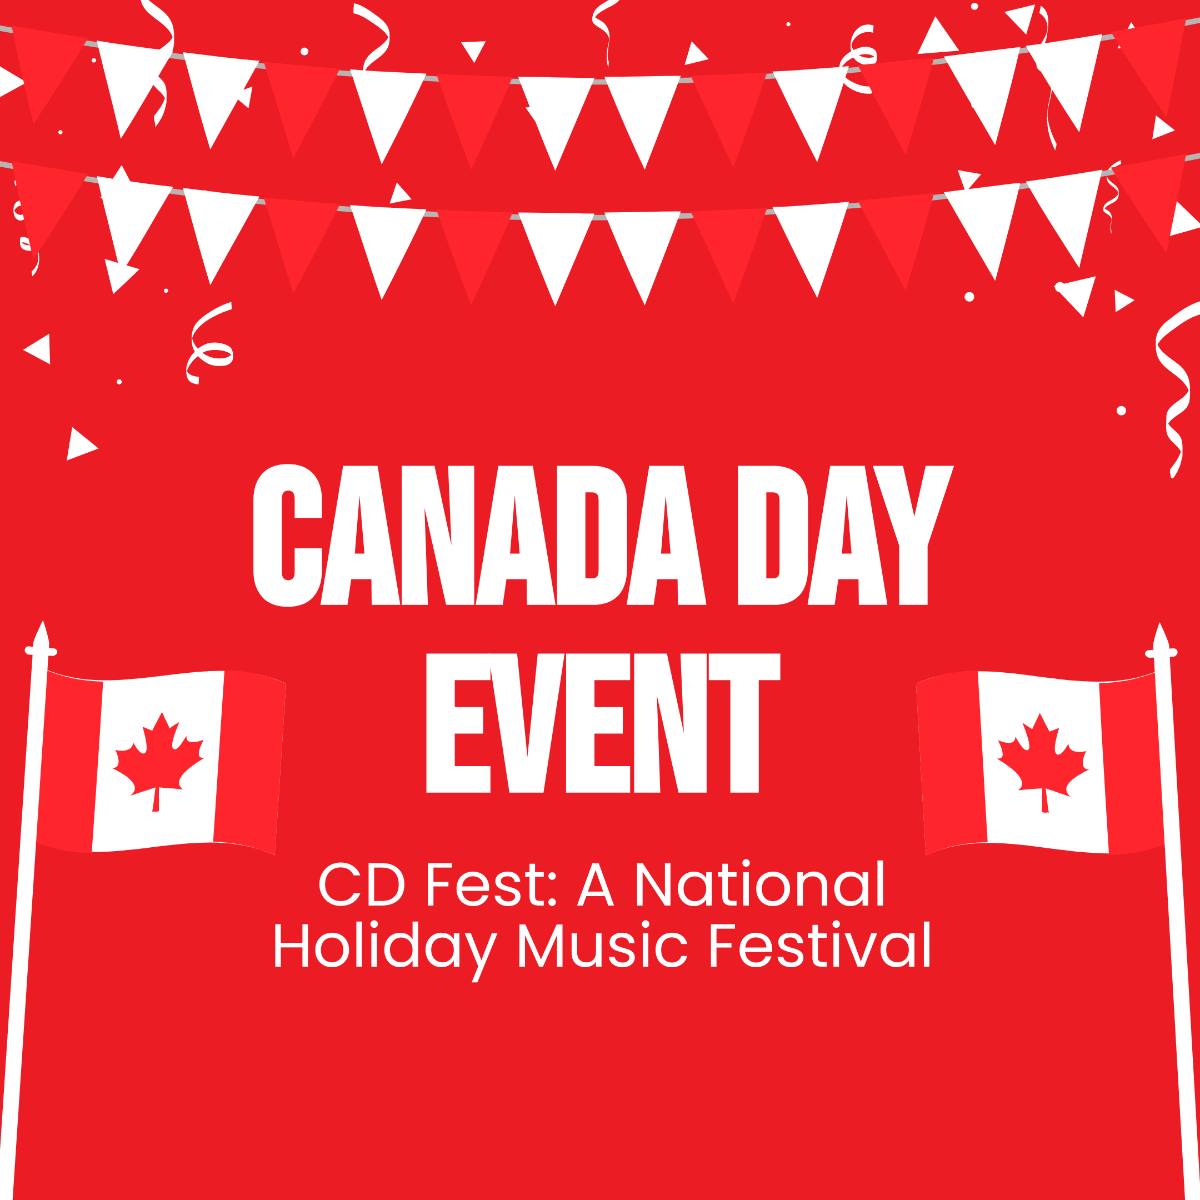 Canada Day Event Instagram Post